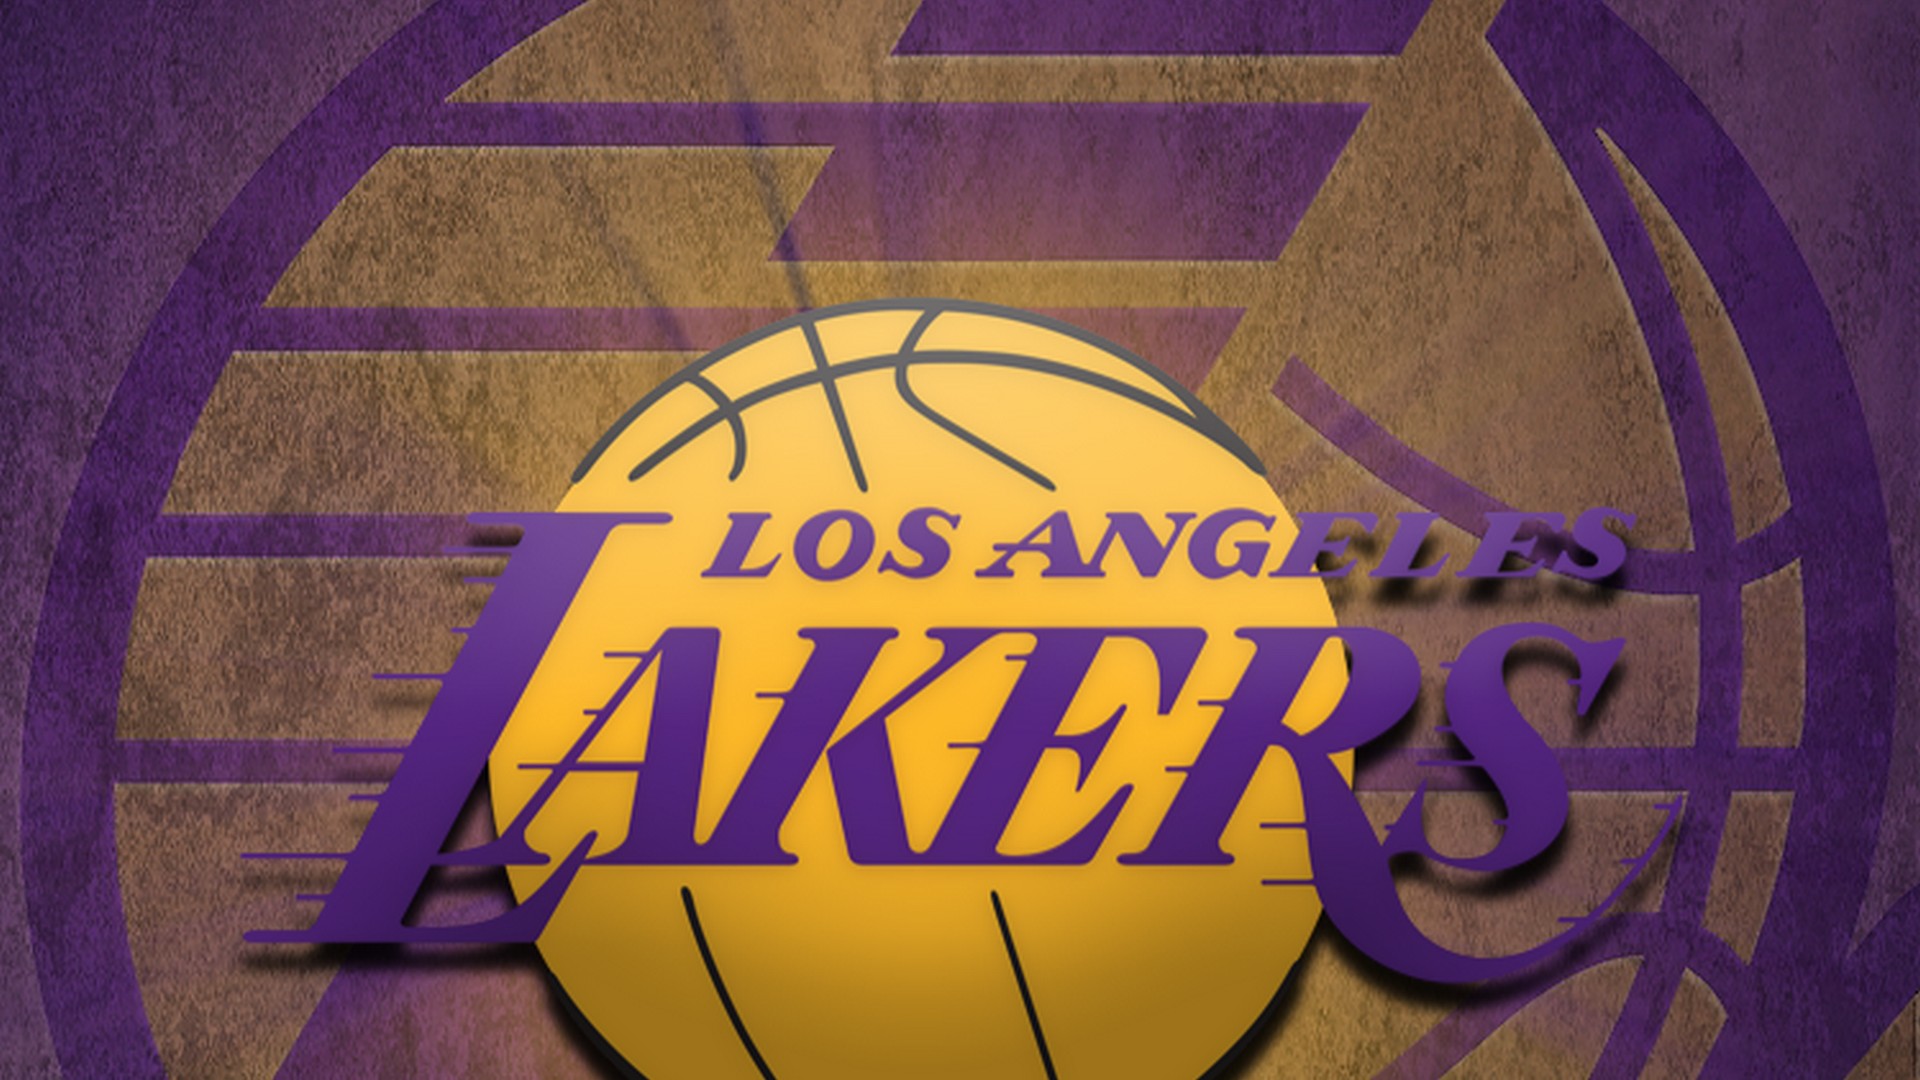 LA Lakers For PC Wallpaper with image dimensions 1920x1080 pixel. You can make this wallpaper for your Desktop Computer Backgrounds, Windows or Mac Screensavers, iPhone Lock screen, Tablet or Android and another Mobile Phone device